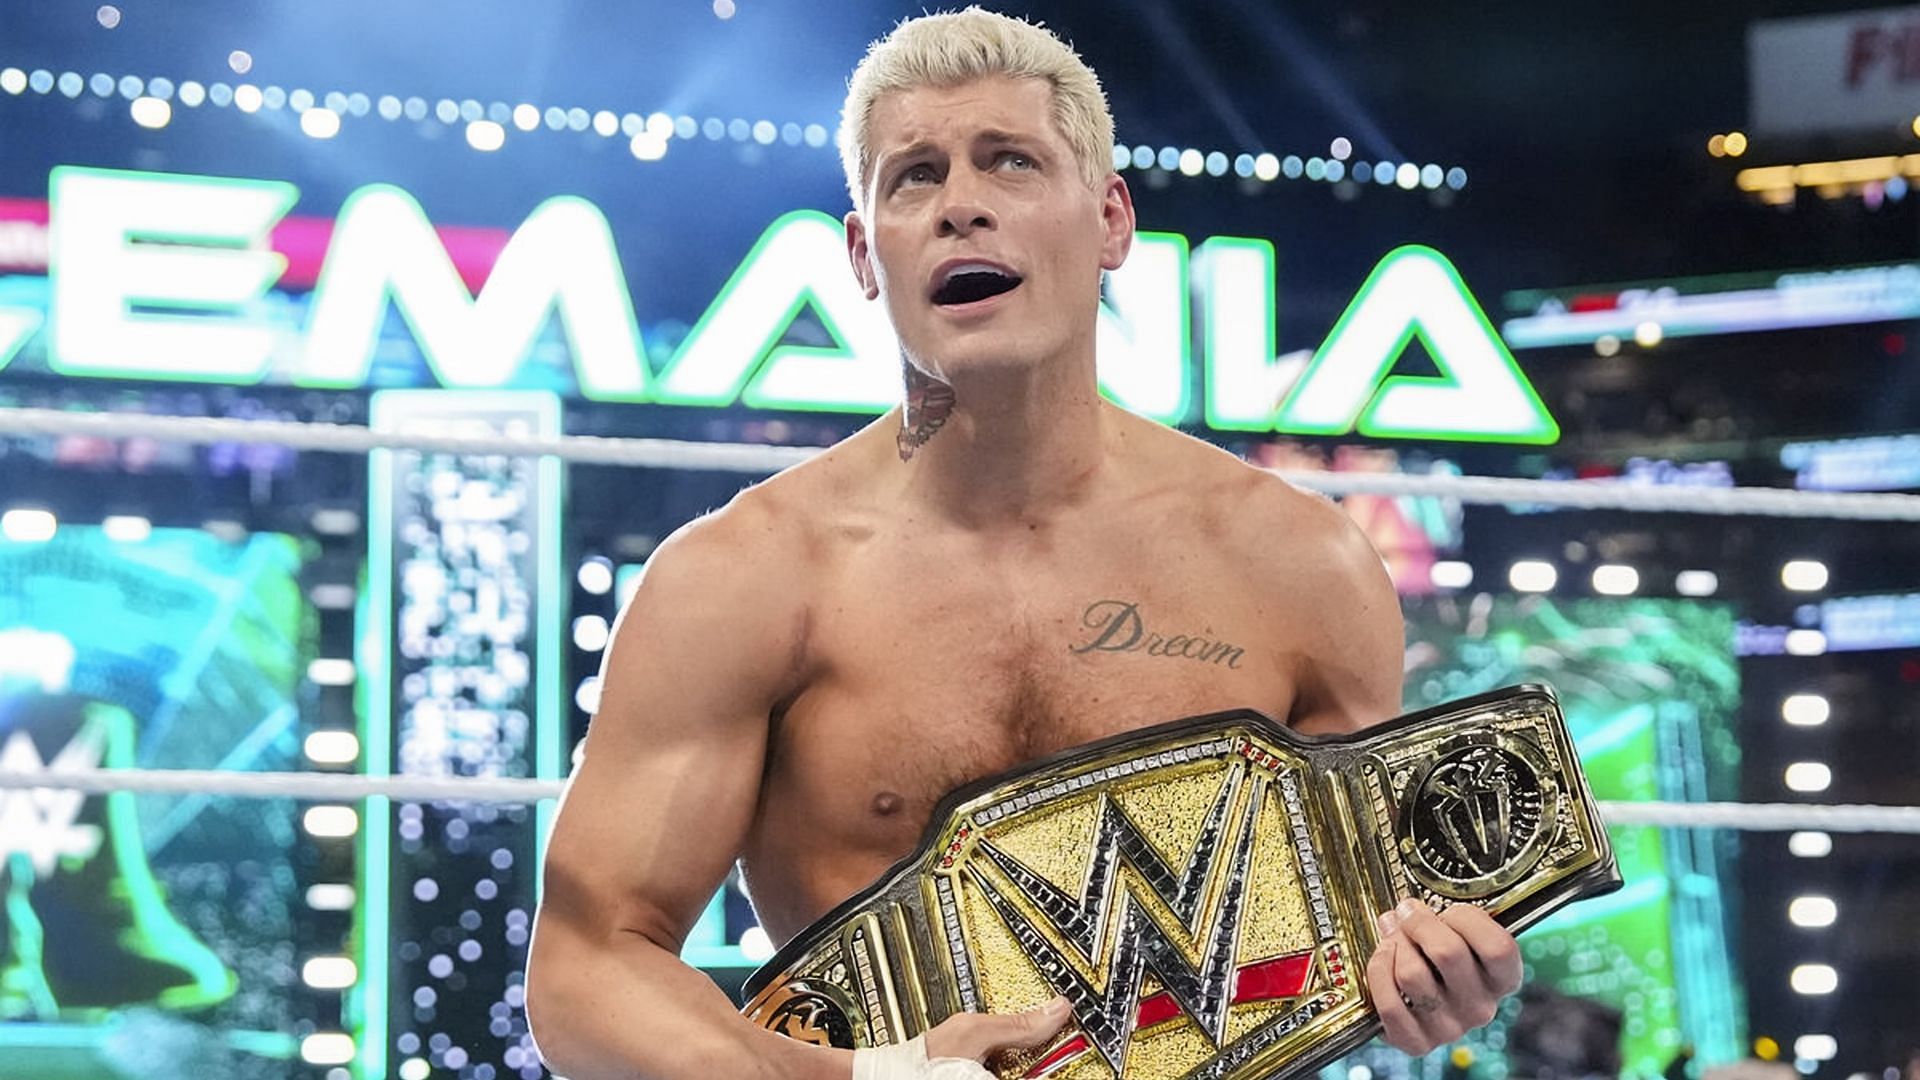 Cody is the current Undisputed WWE Champion (image credit:WWE.com)